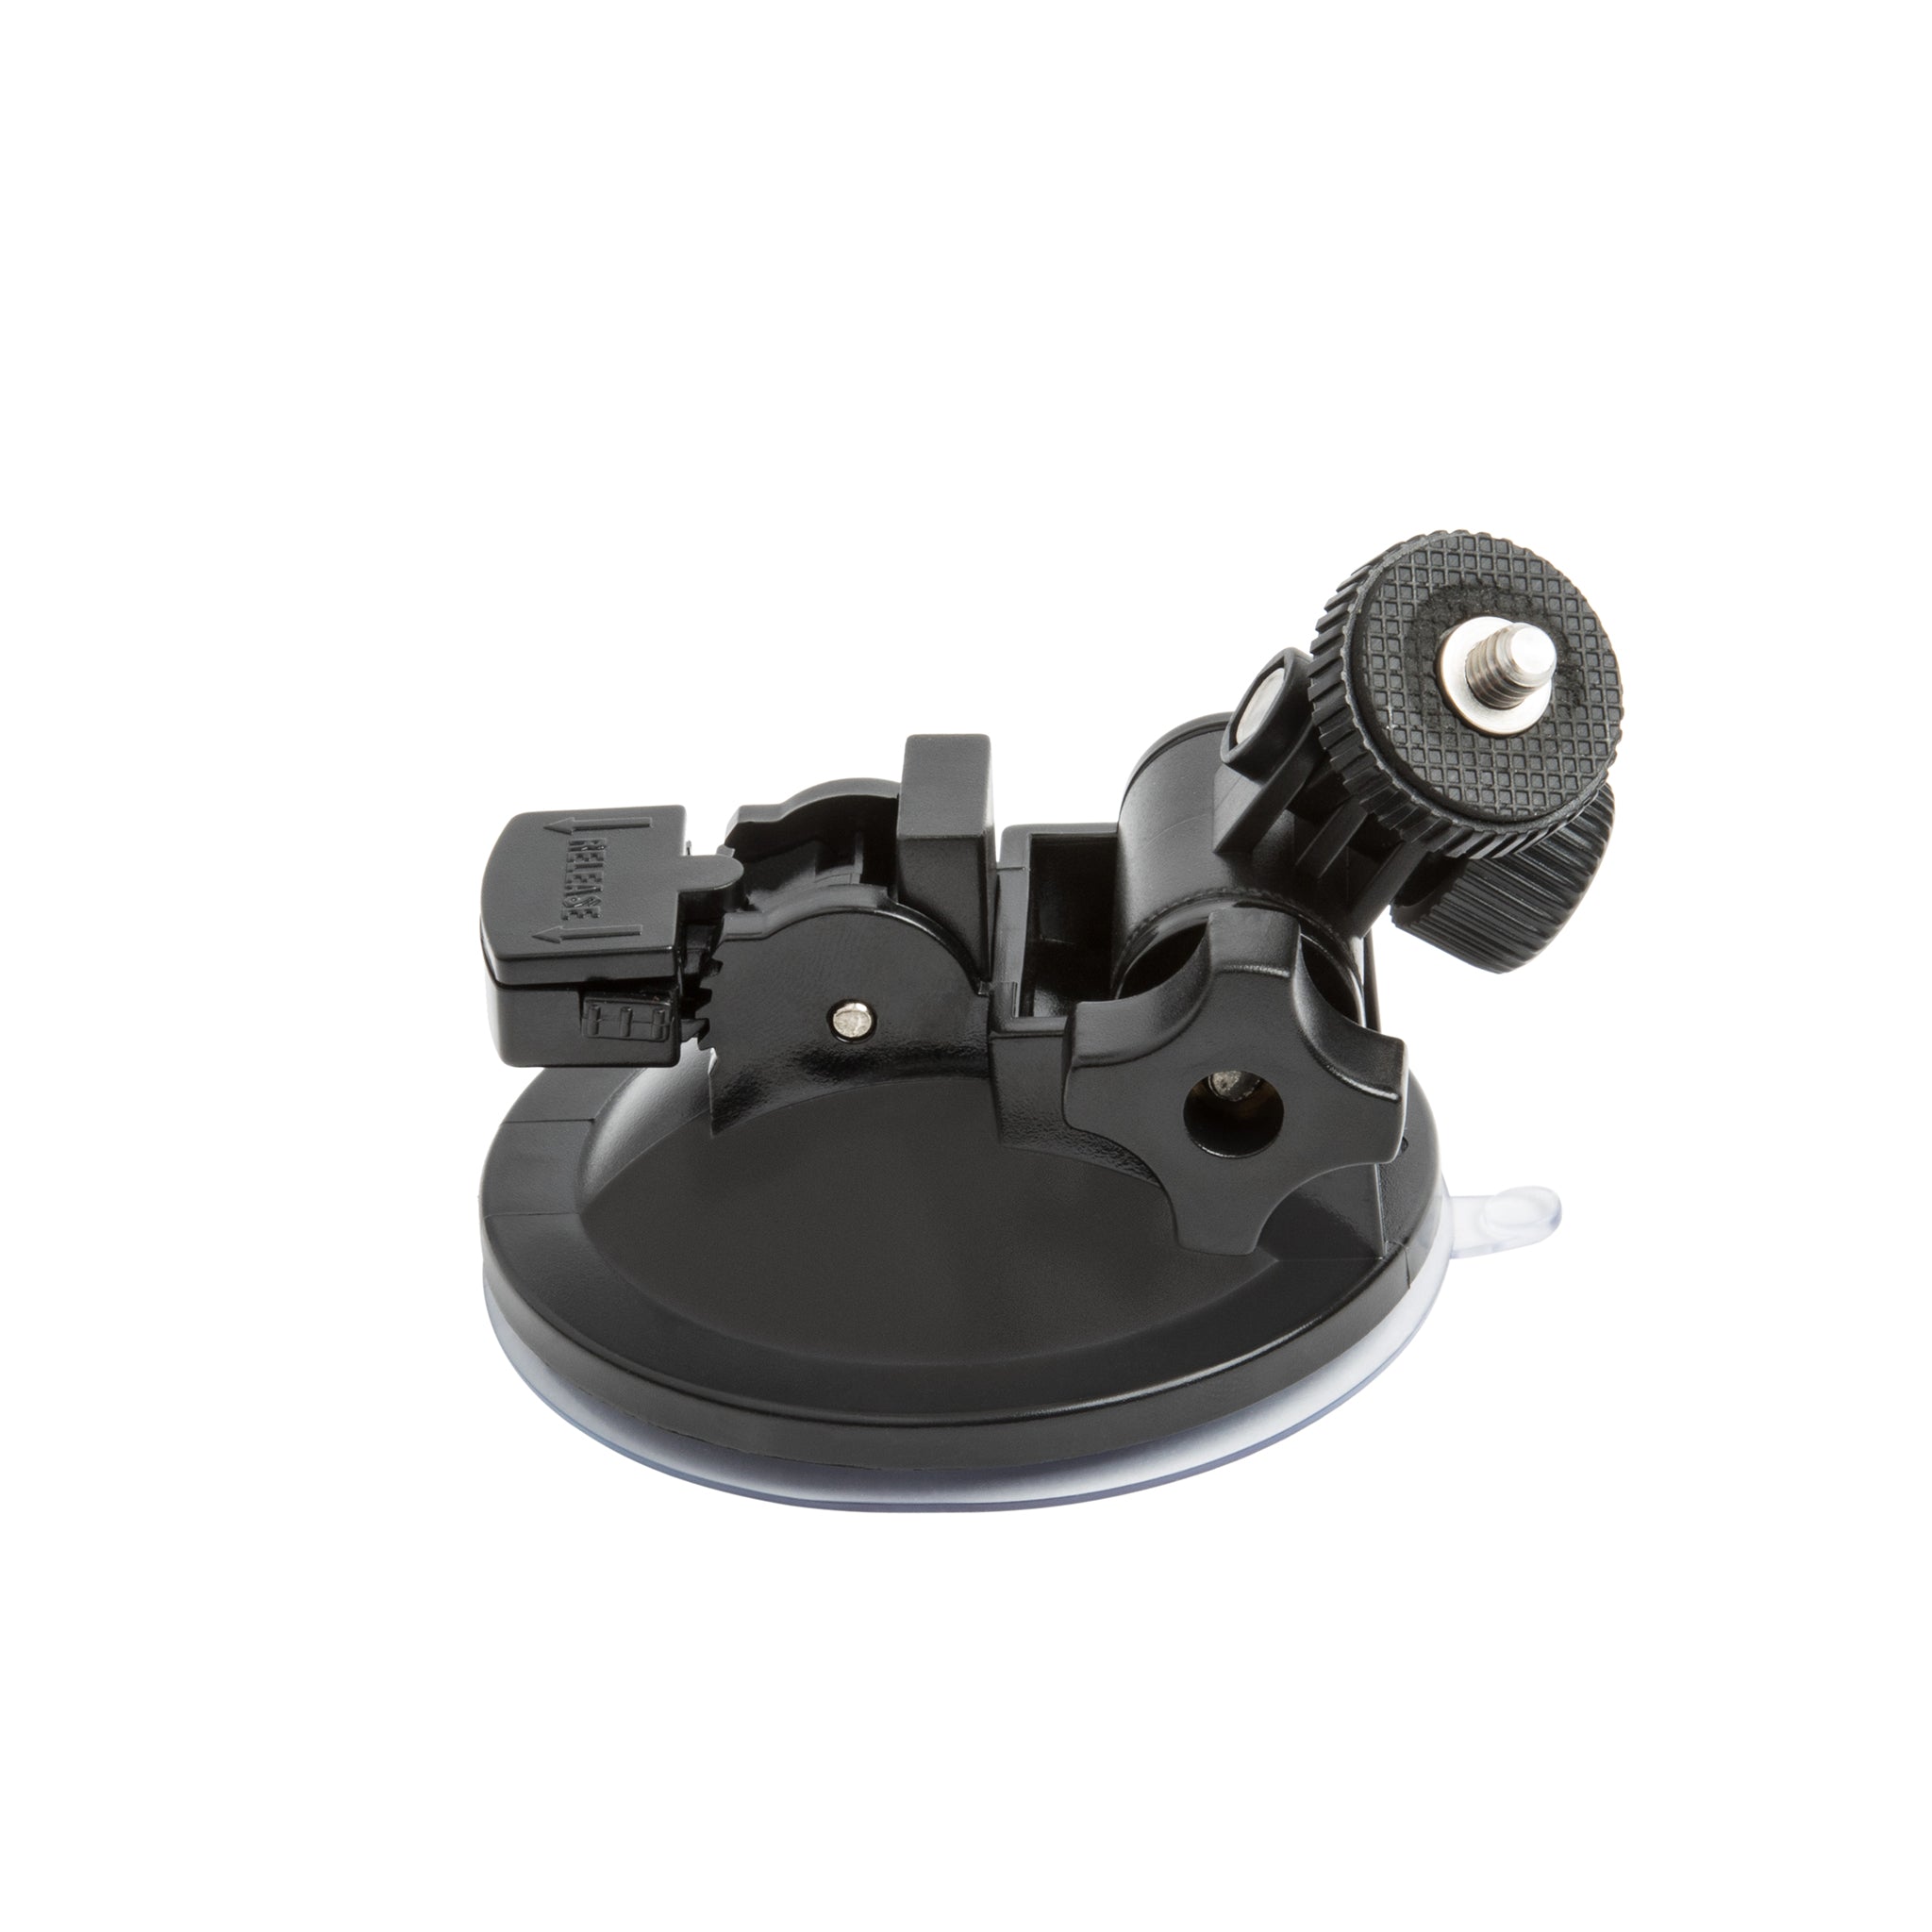 Suction Cup Mount for Turtle Shell or Buckshot